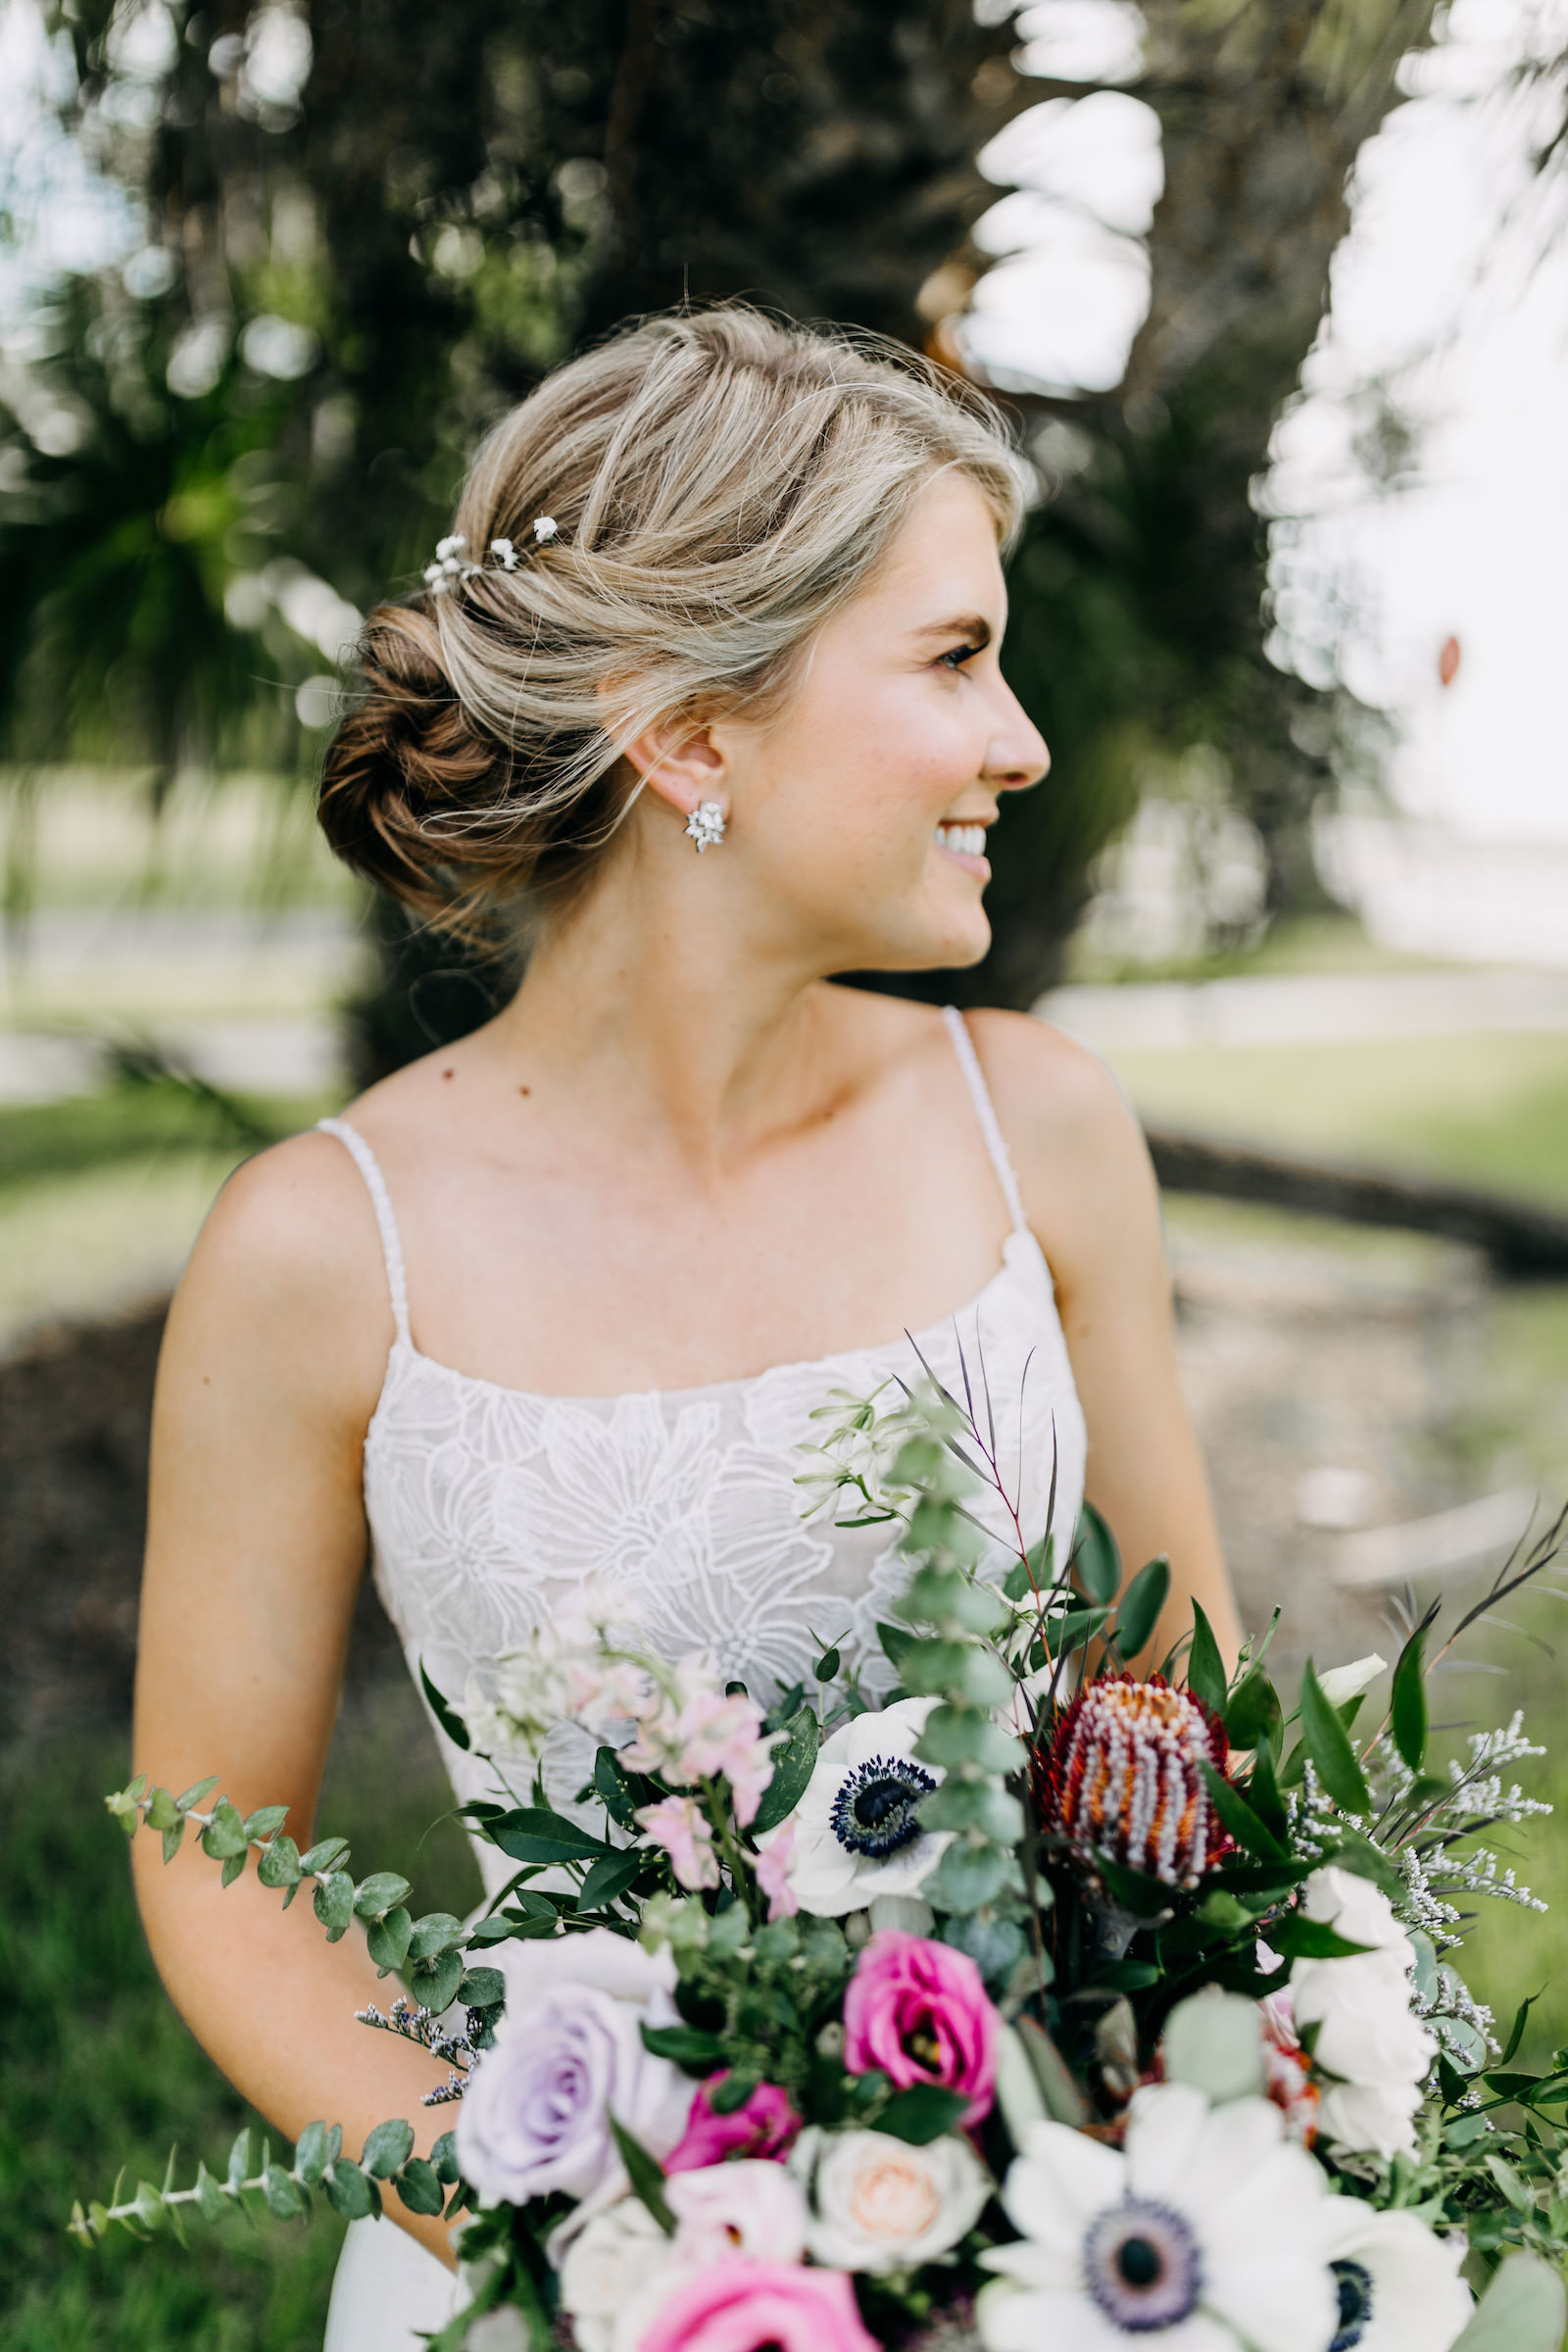 Bride with Braided Updo Wearing Lace Straight Neckline Wedding Dress Holding Lush Floral Bouquet, White Anemone, Pink and Purple Roses with Greenery | Tampa Bay Wedding Photographer Amber McWhorter Photography | Wedding Florist Leaf It To Us